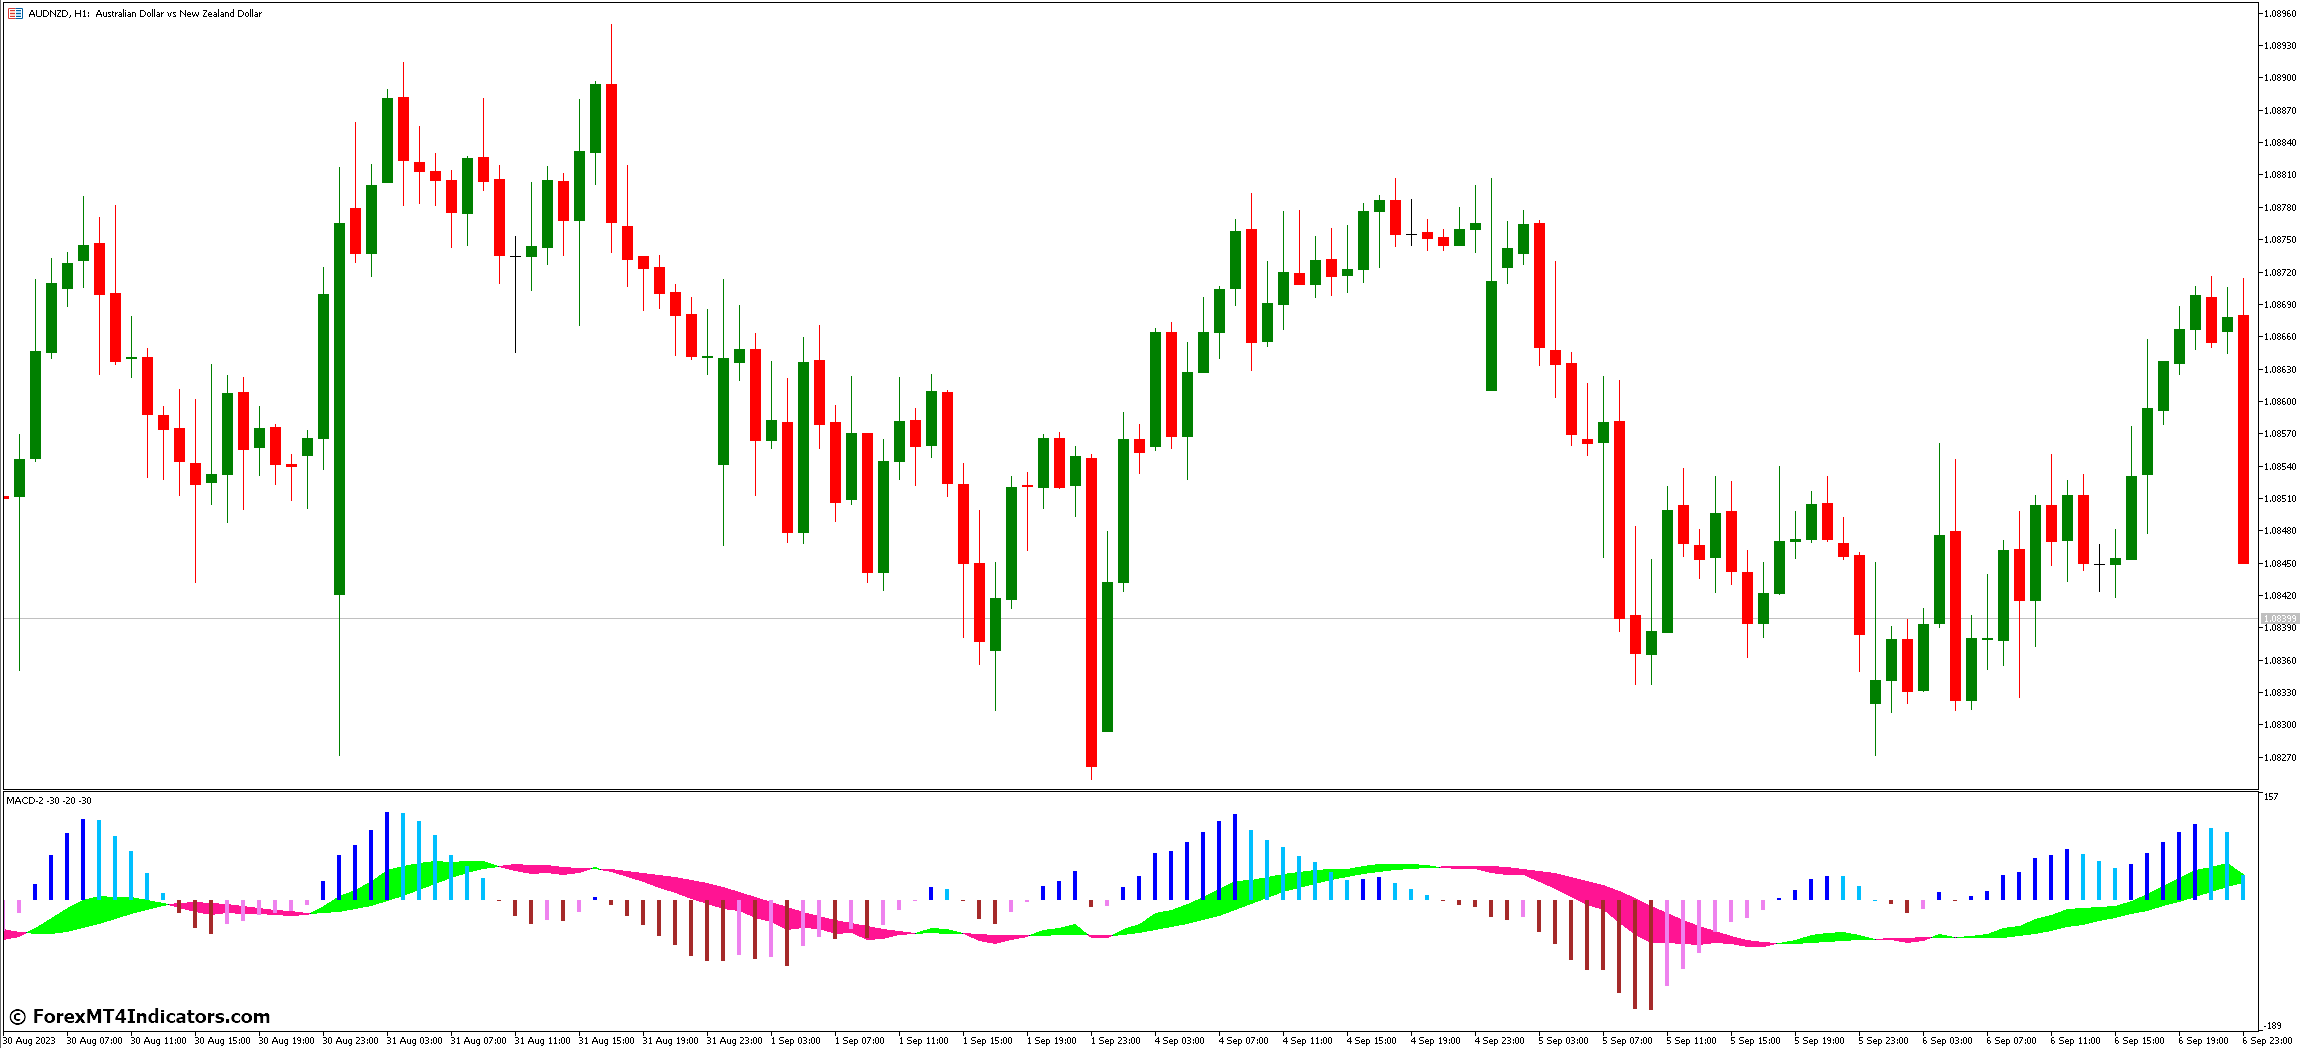 How to Use MACD 2 MT5 Indicator Effectively